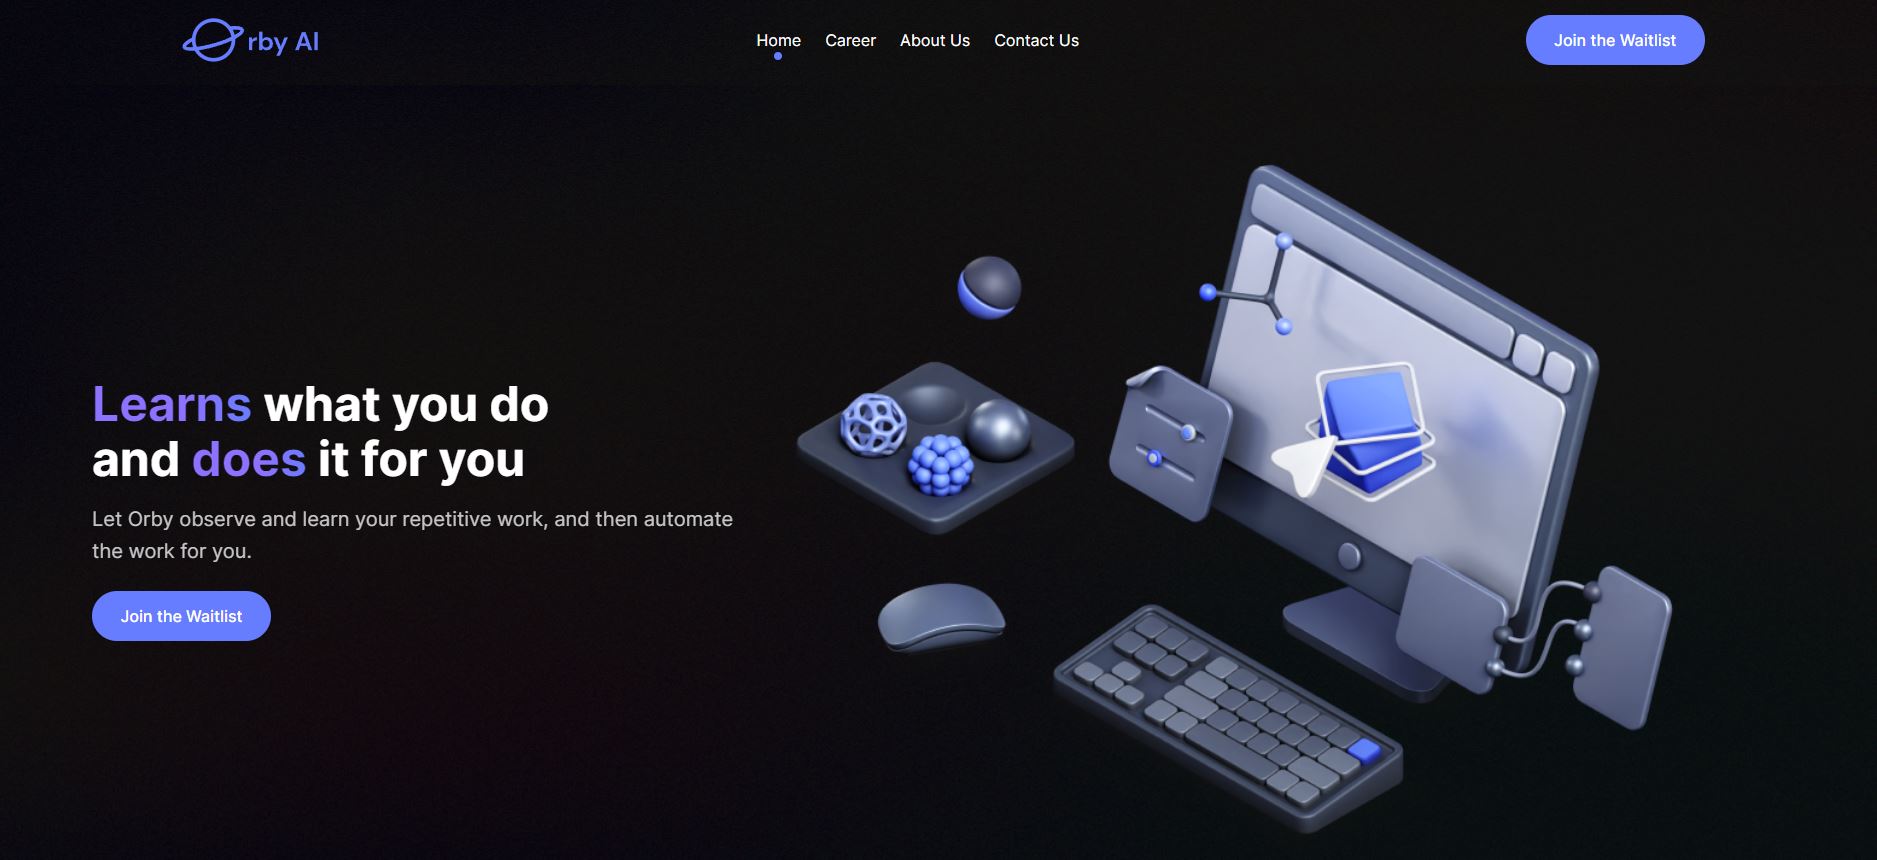 Orby AI has raised $4.5M in seed funding with investors